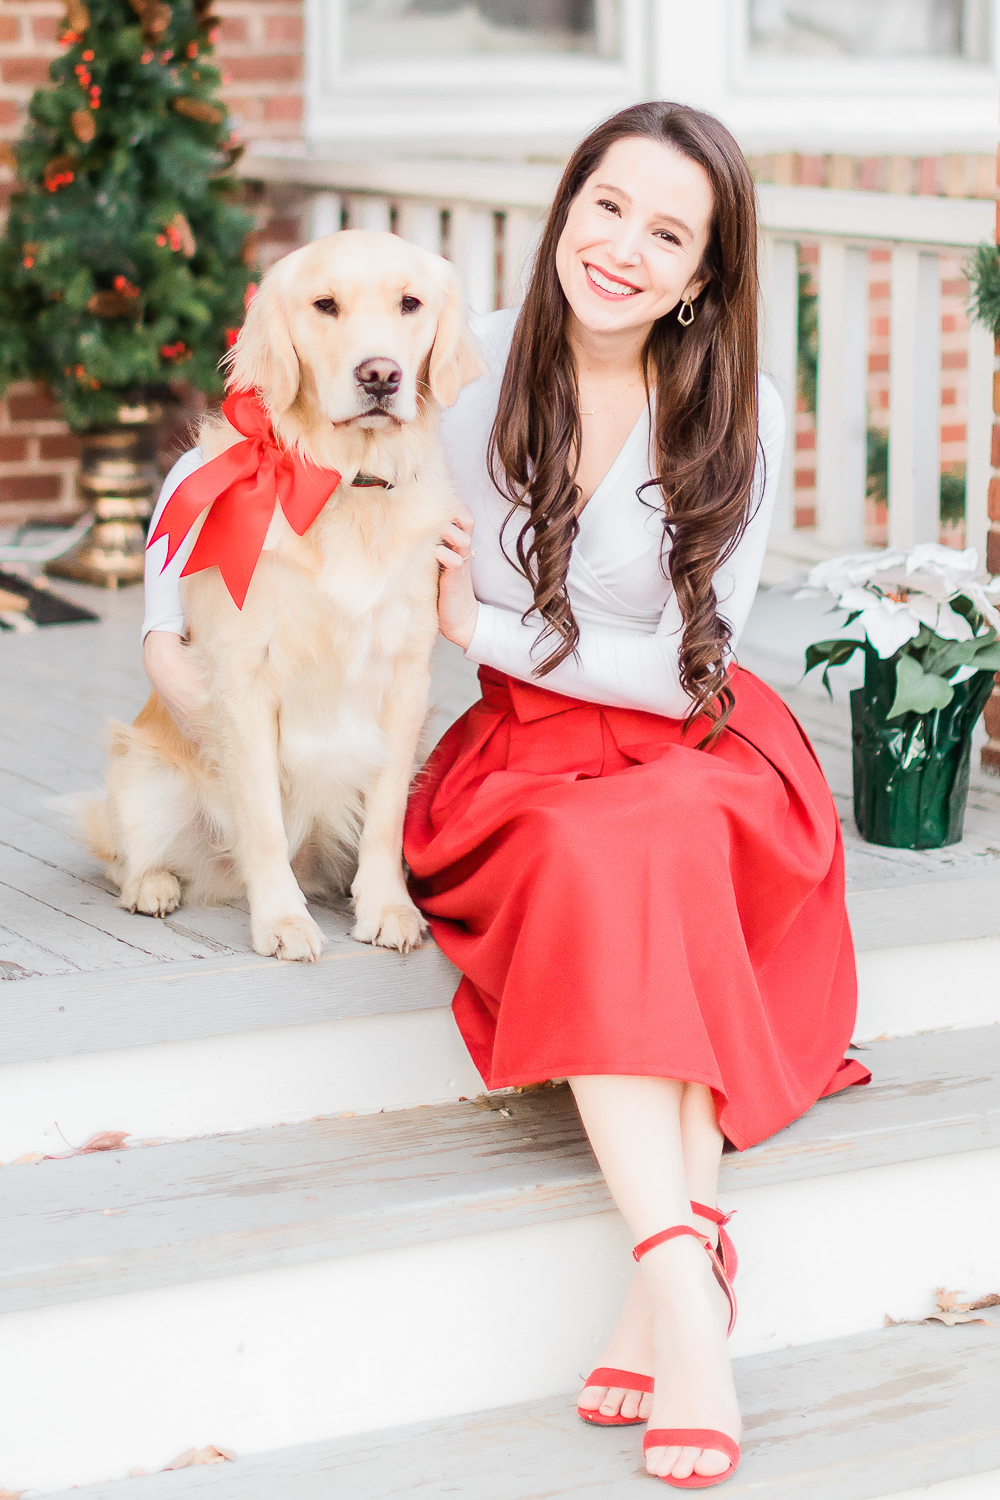 Best of December 2019, Things I Loved in December, cute holiday golden retriever, cute Christmas puppy, Christmas golden retriever, popular affordable fashion blogger Stephanie Ziajka, popular affordable fashion blog Diary of a Debutante